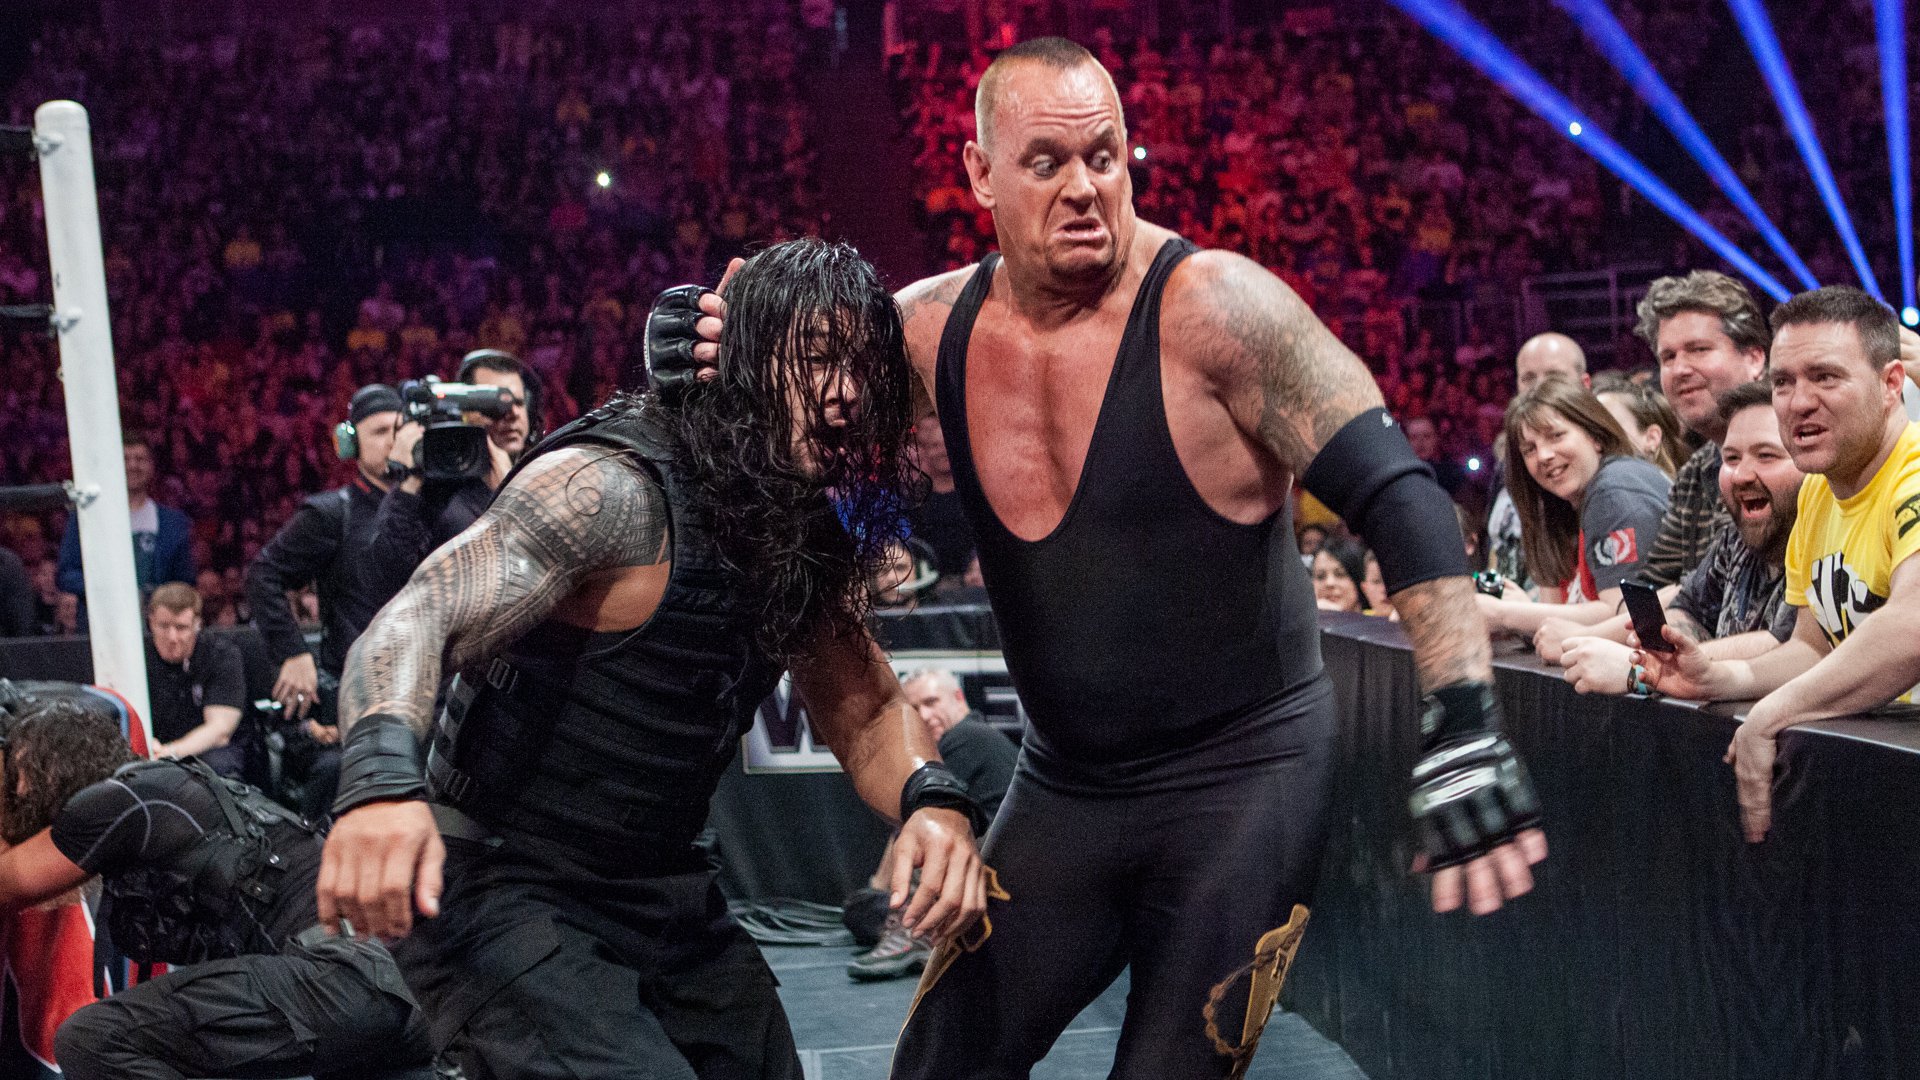 Wrestlemania 33 results - Roman Reigns defeats The Undertaker ​ | WWE News  - Times of India